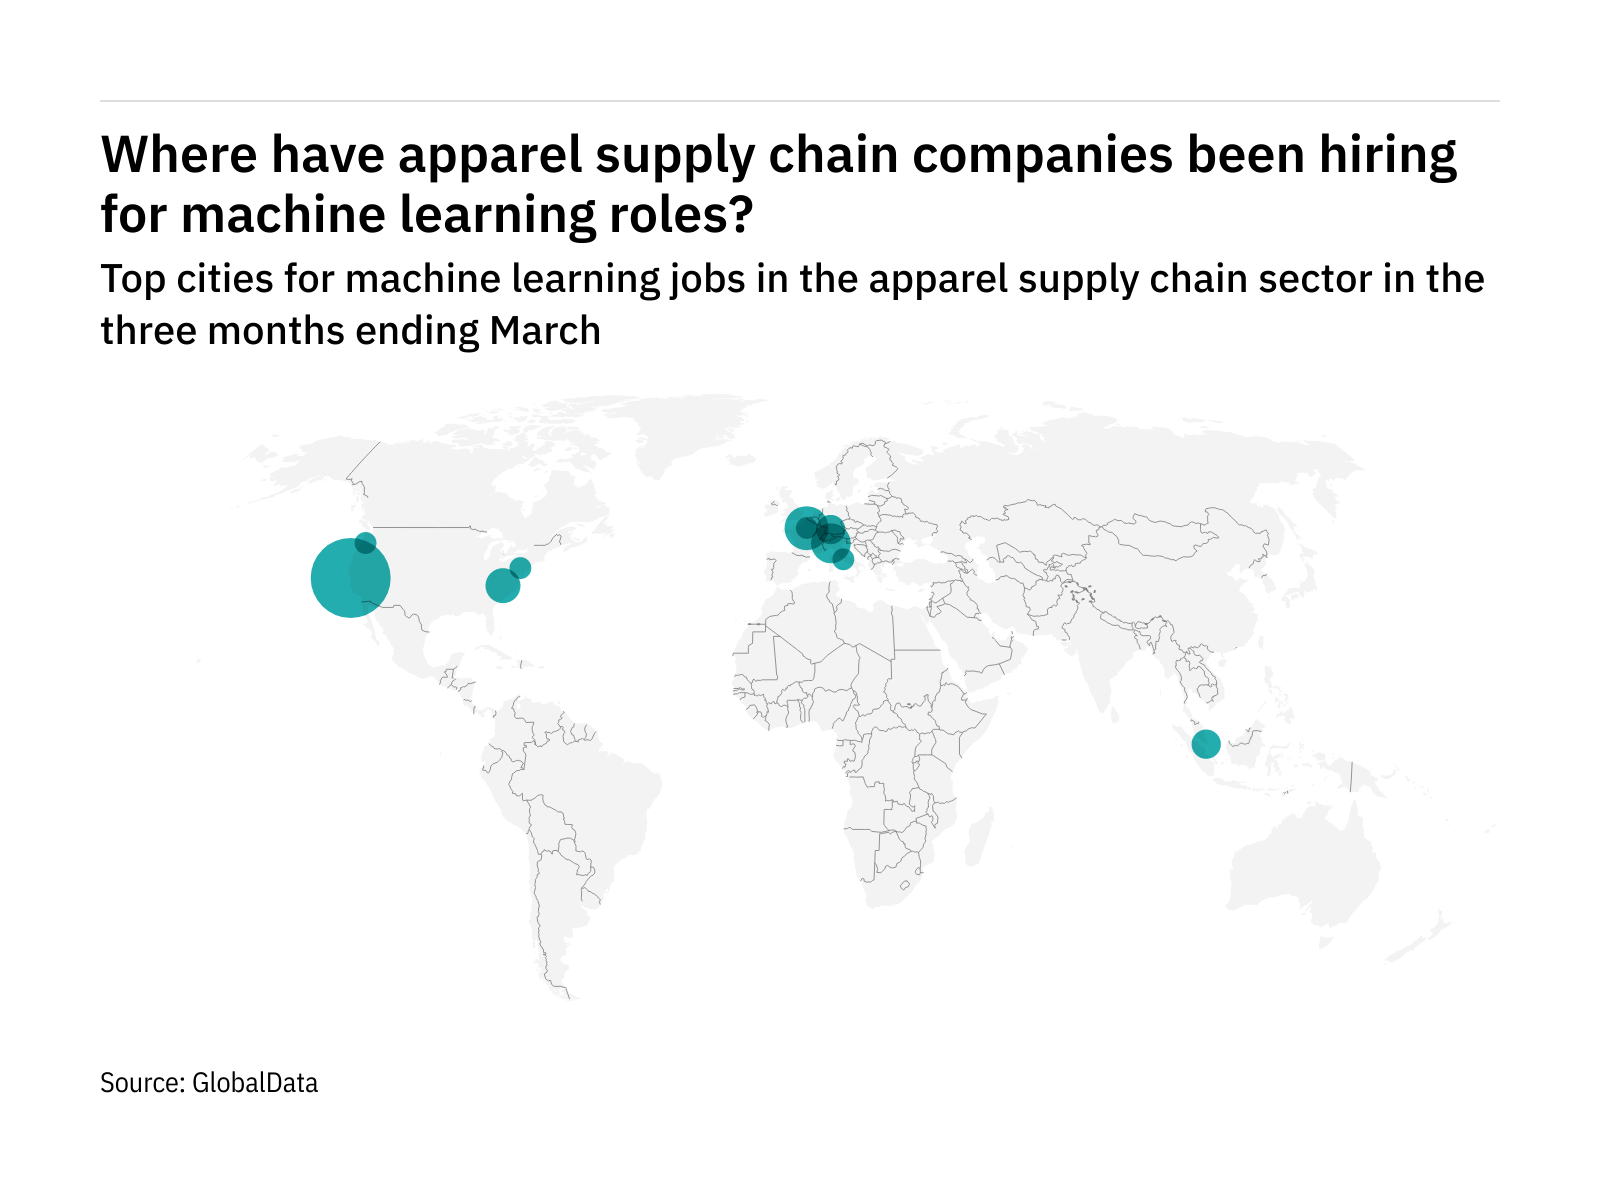 Europe sees hiring boom in apparel machine learning roles